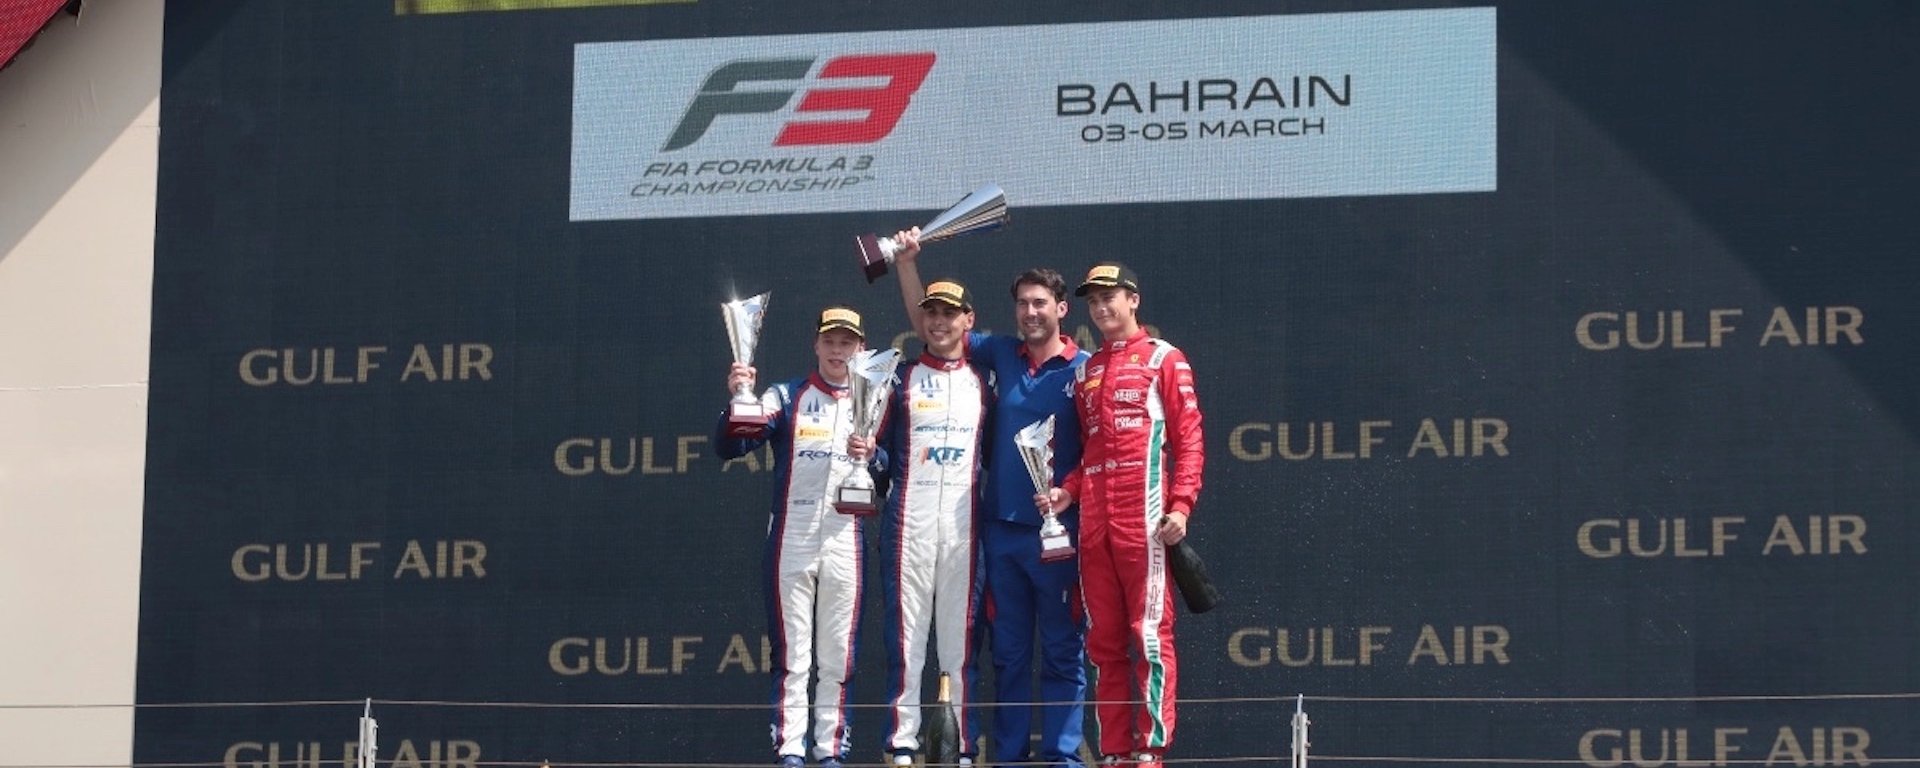 Four men on the #1 step of the podium with the German, Brazilian, and Swedish flags in the background and the text "FIA Formula 3 Championship Bahrain 03–05 March" displayed in the background above Gulf Air sponsorship.